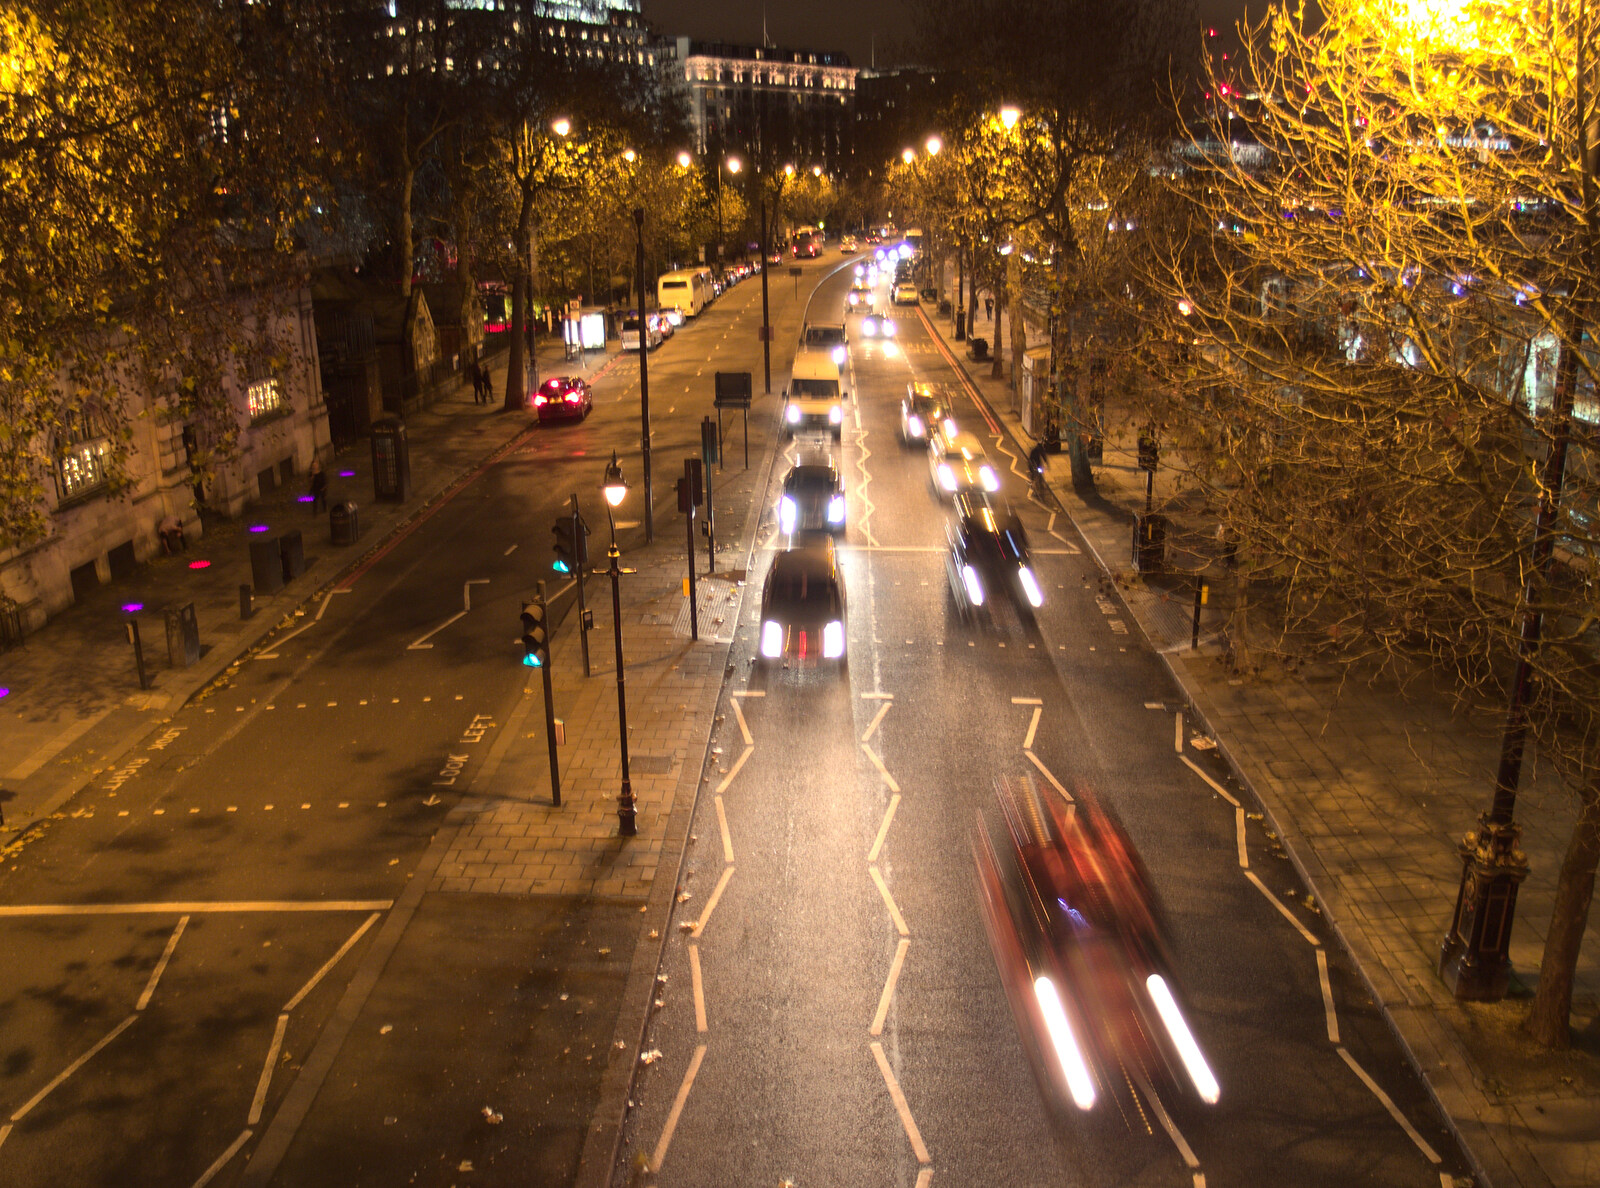 Victoria Embankment from SwiftKey Innovation Nights, Westminster, London - 19th December 2014